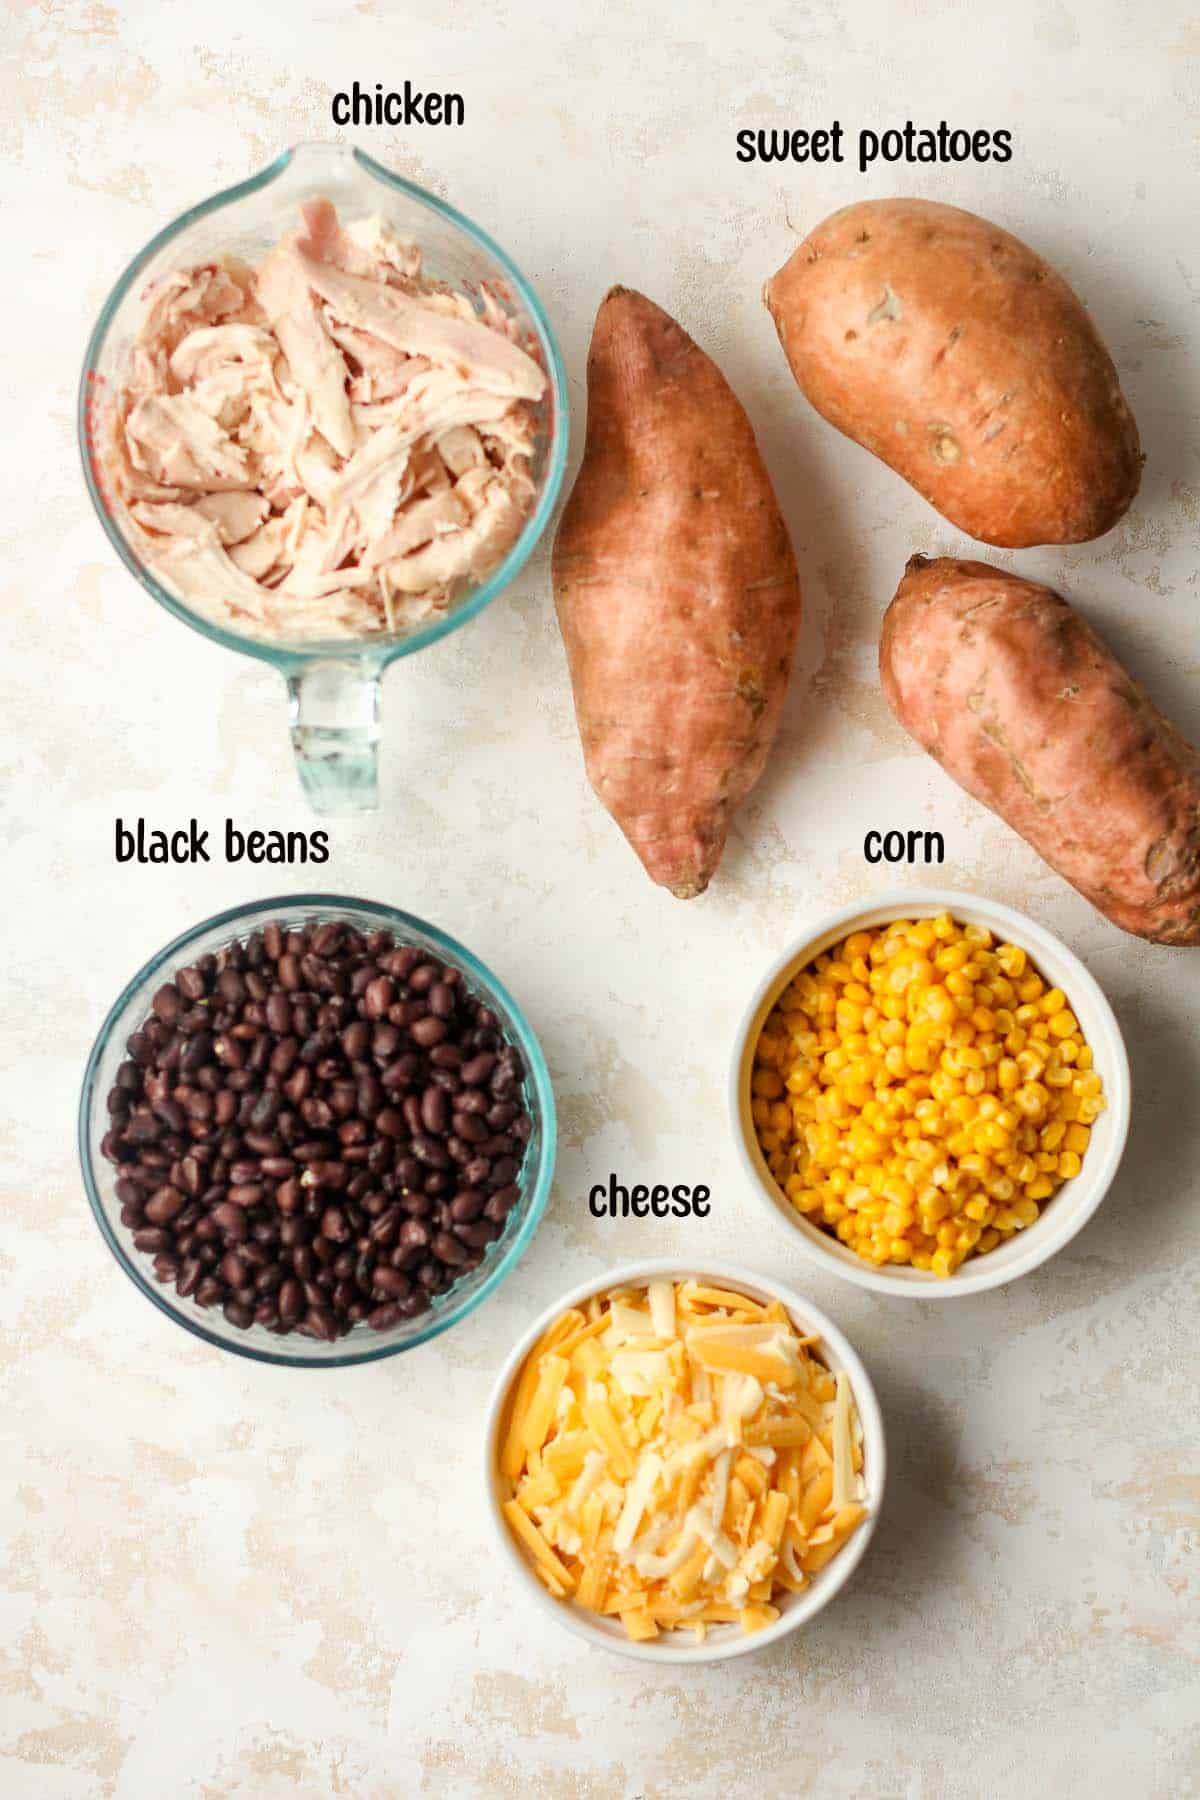 Ingredients for the Mexican sweet potato casserole.